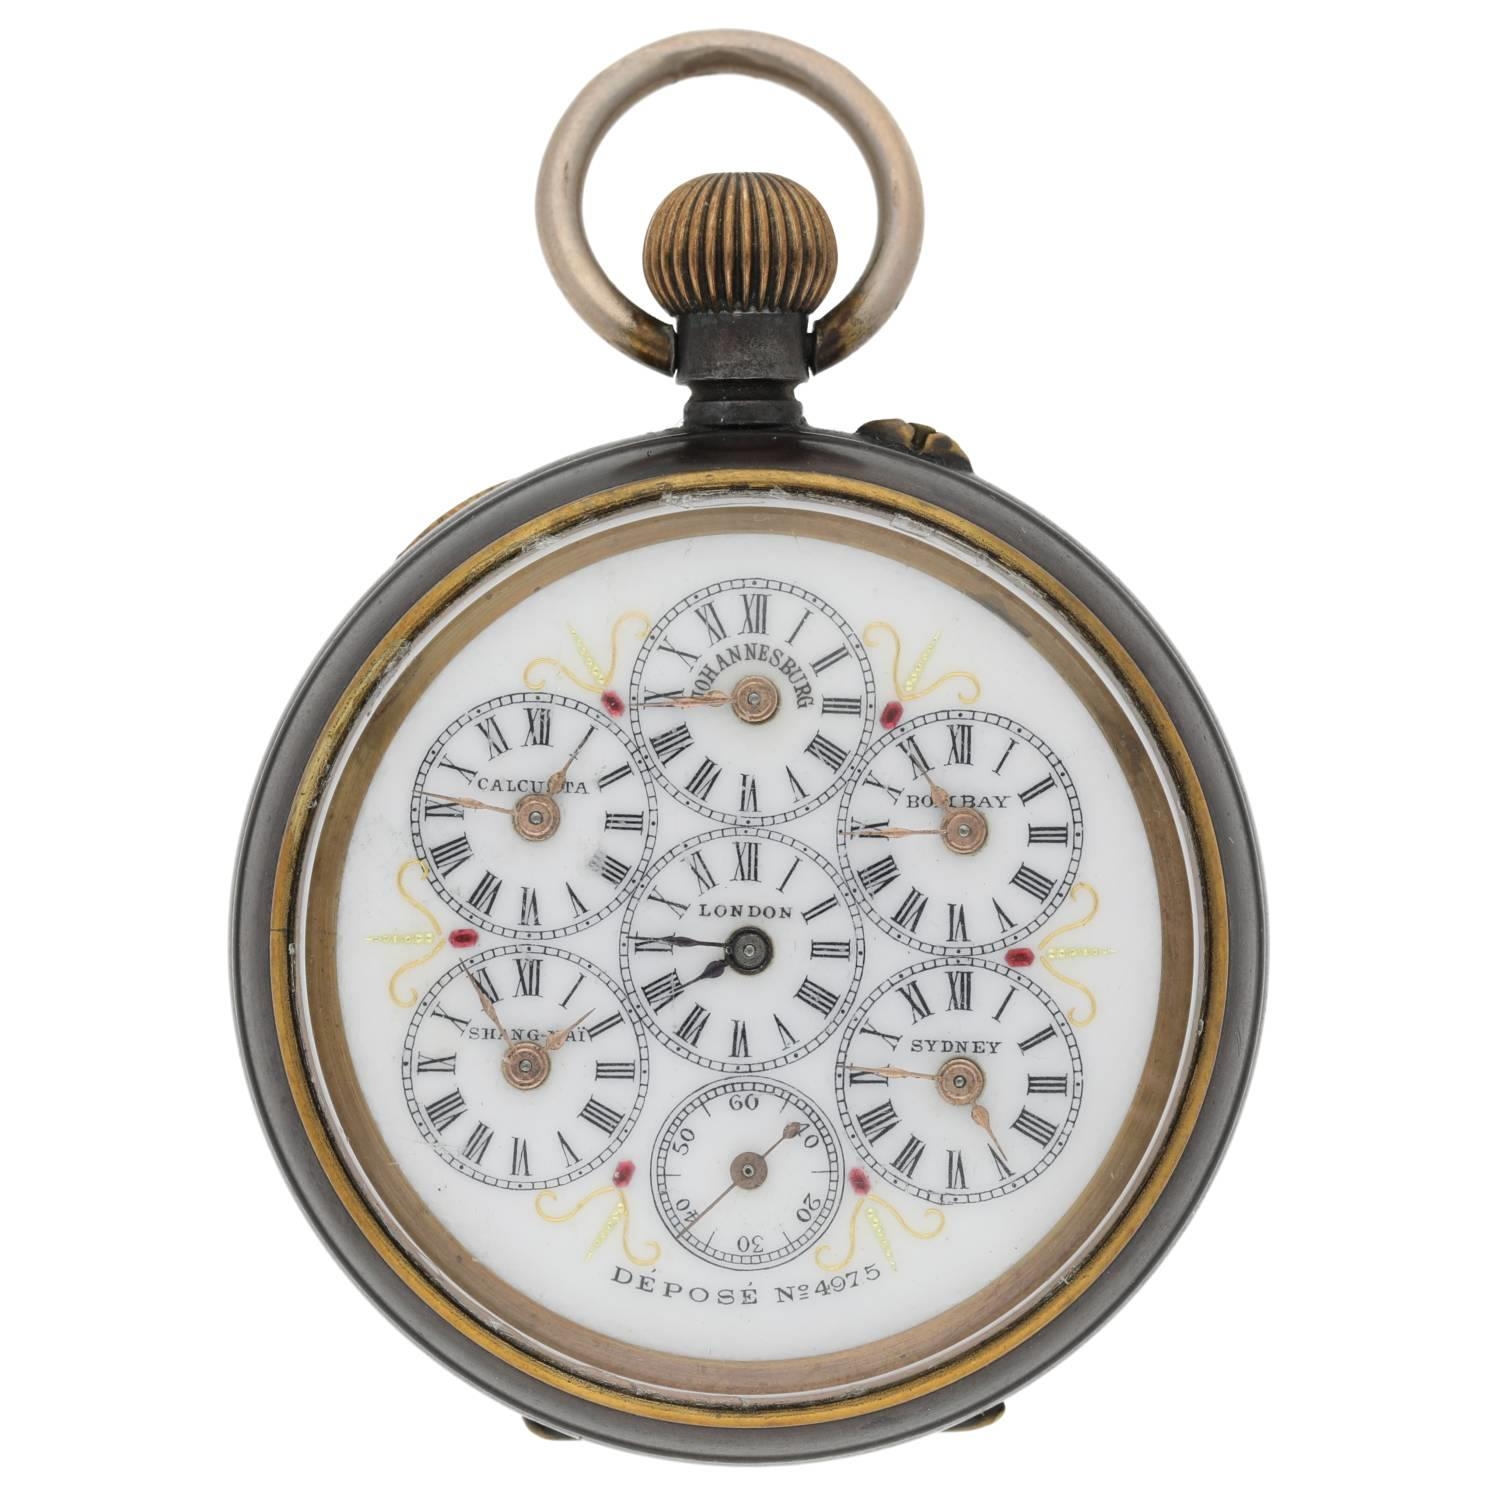 Swiss World Time gunmetal lever pocket watch, pin-set gilt frosted bar movement with compensated - Image 2 of 5